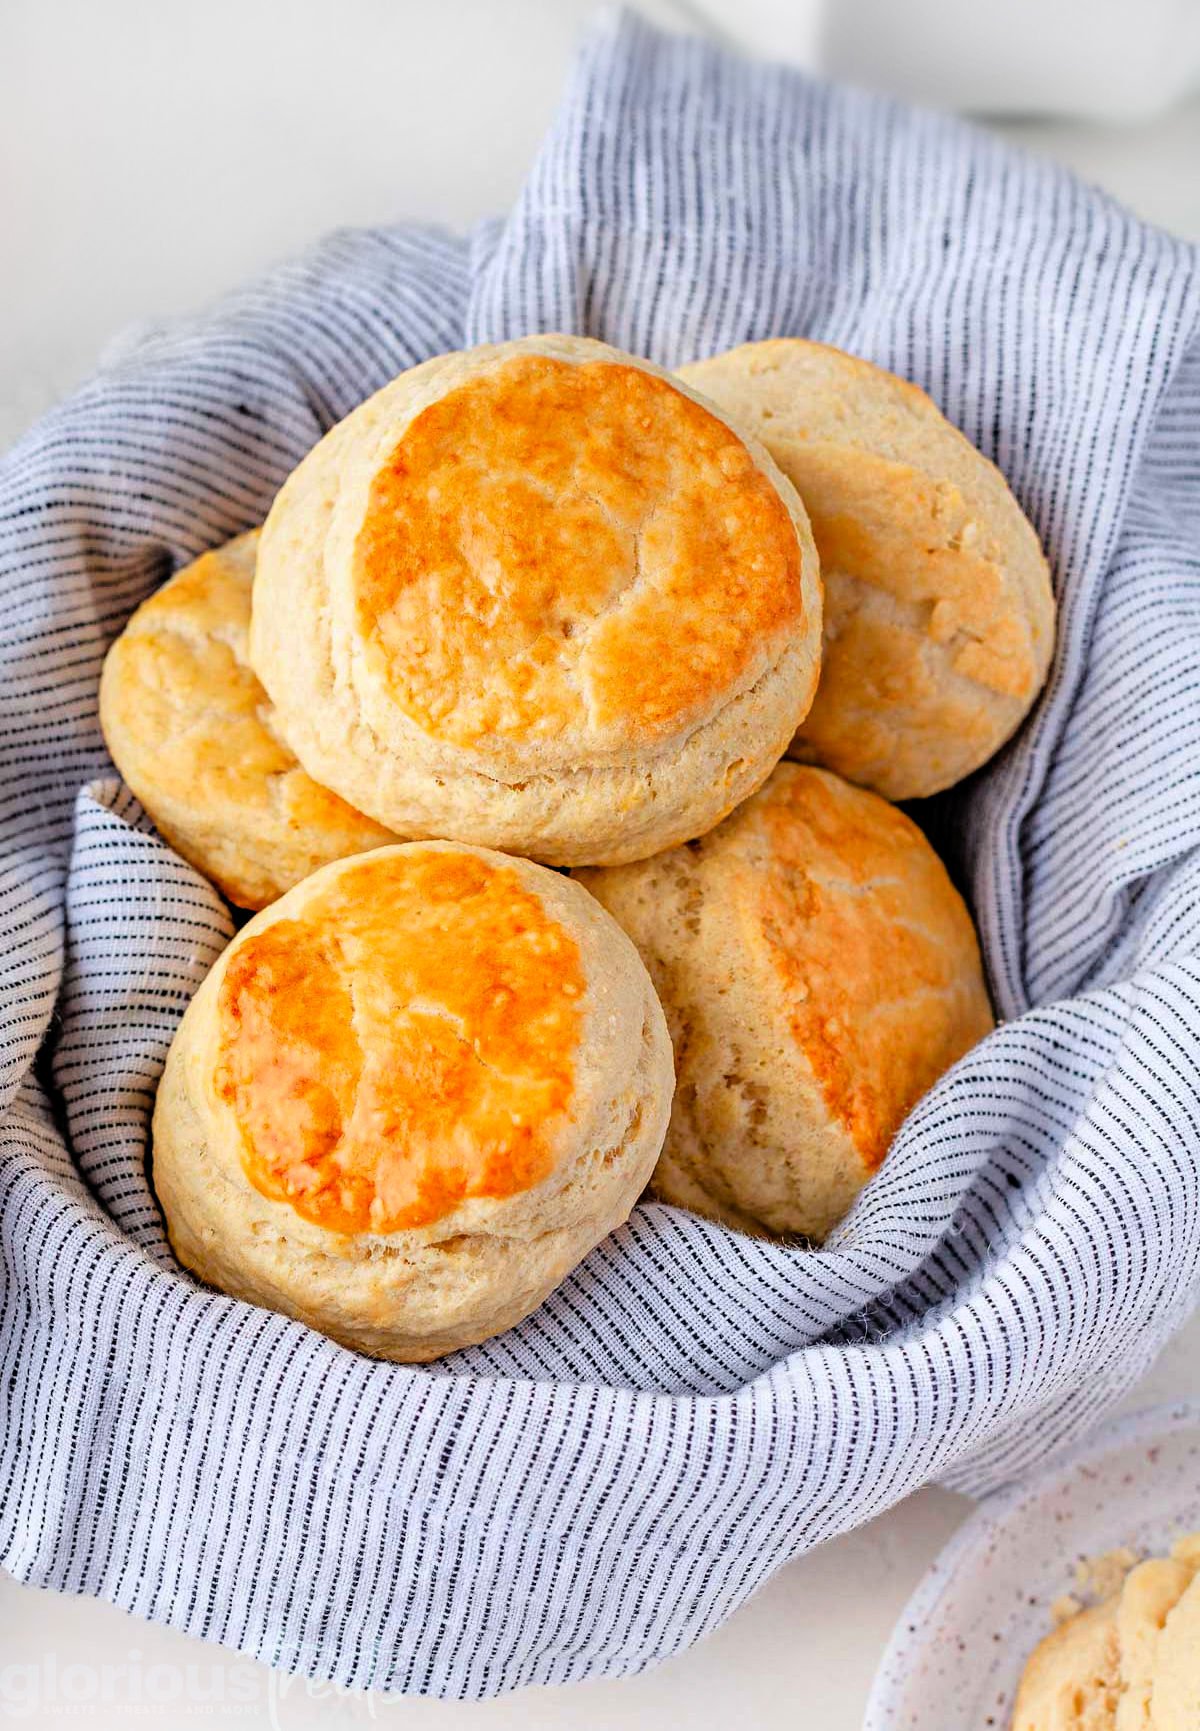 top down look at five biscuits in a basket that is lined with a blue and white towel. biscuits are golden brown on top.